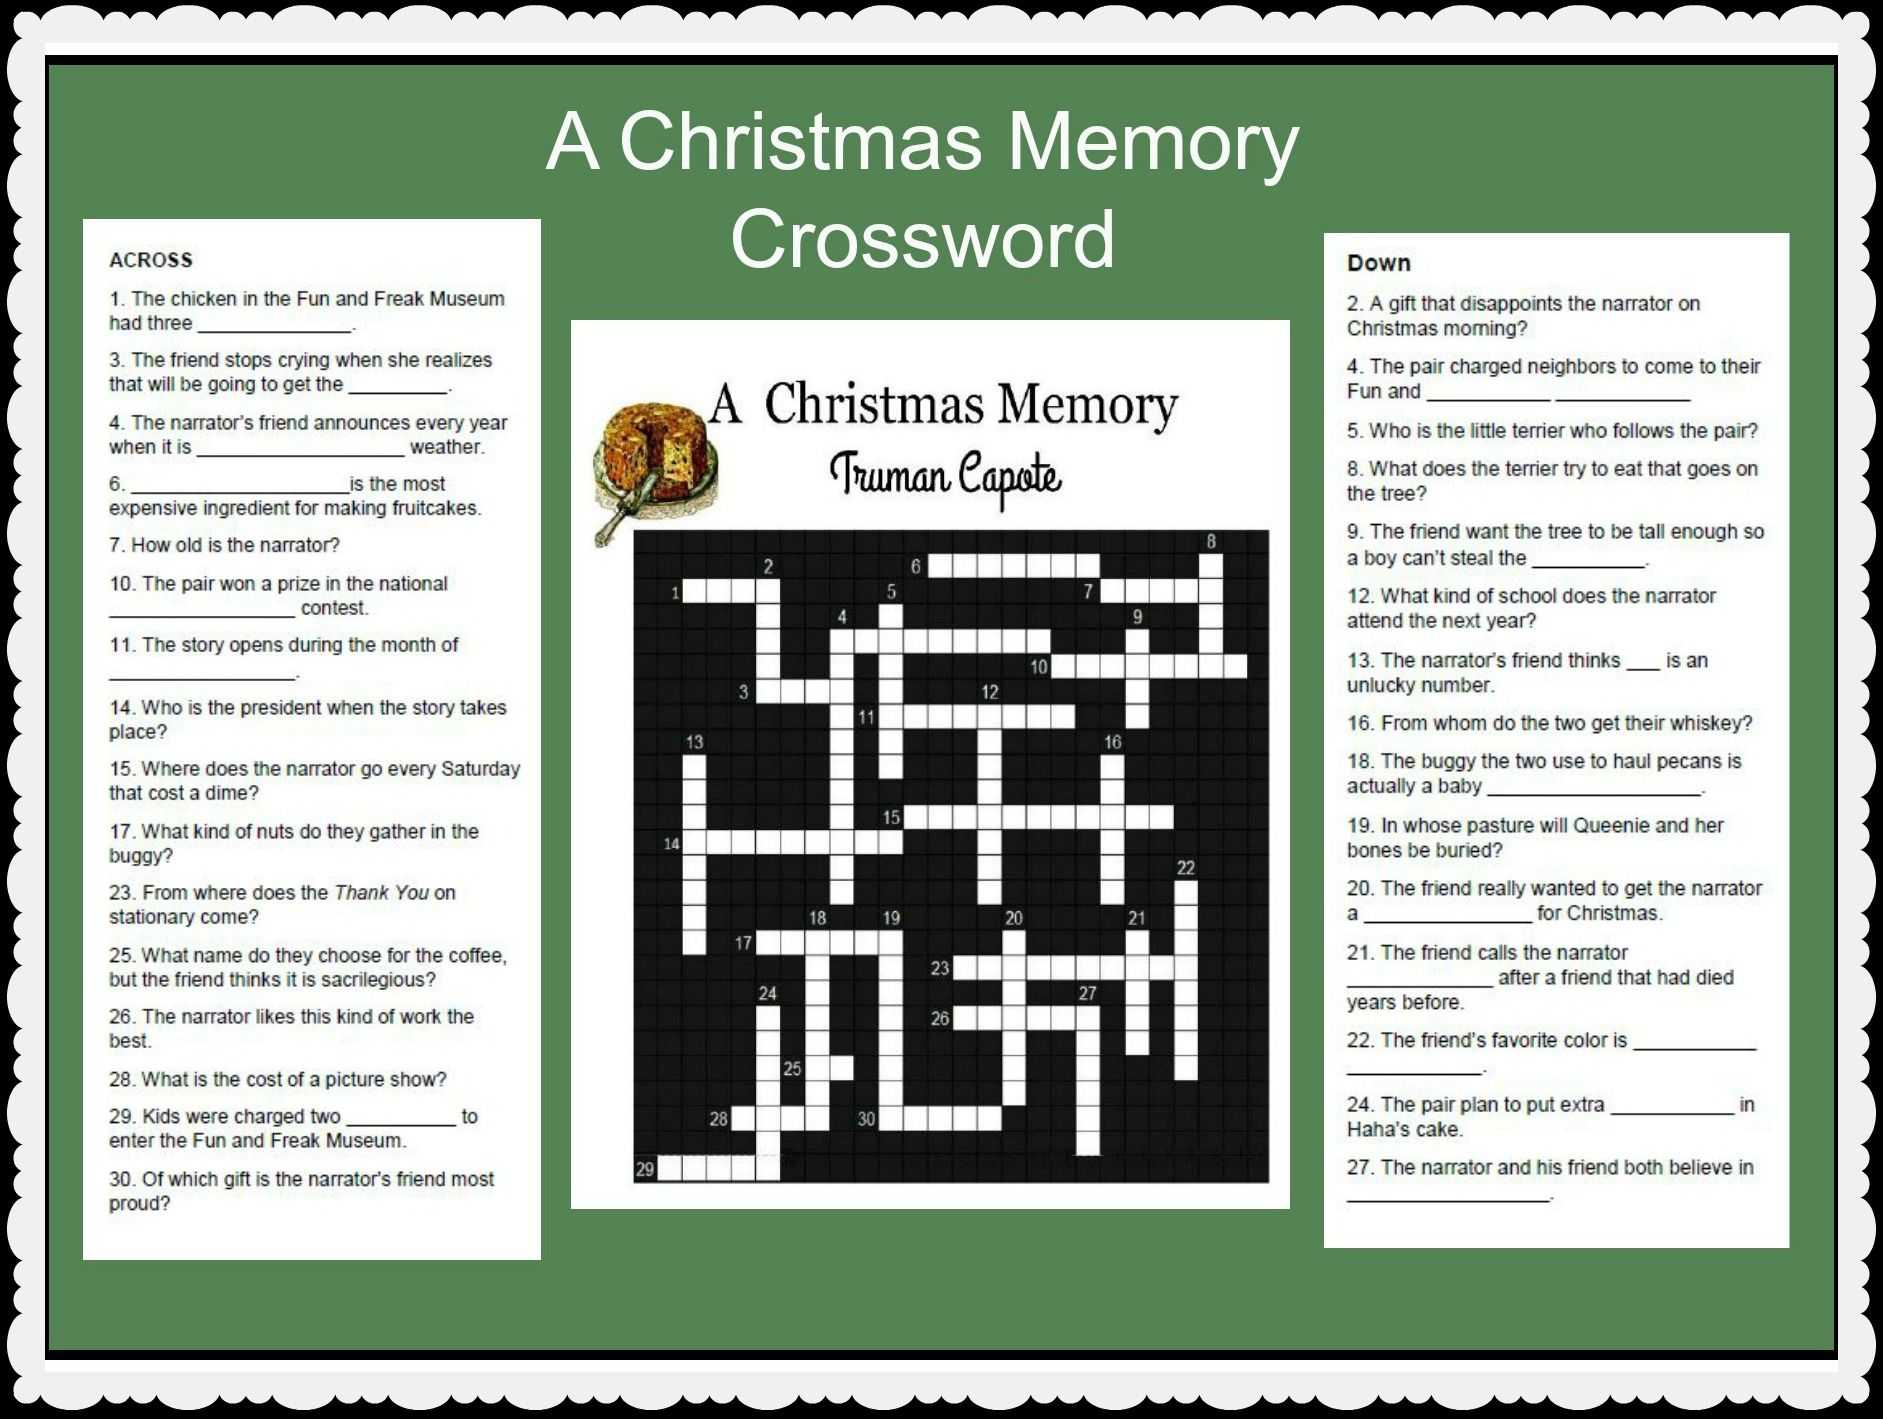 The Gift Of the Magi Worksheet Answer Also A Christmas Memory by Truman Capote A Lesson Activity to Review